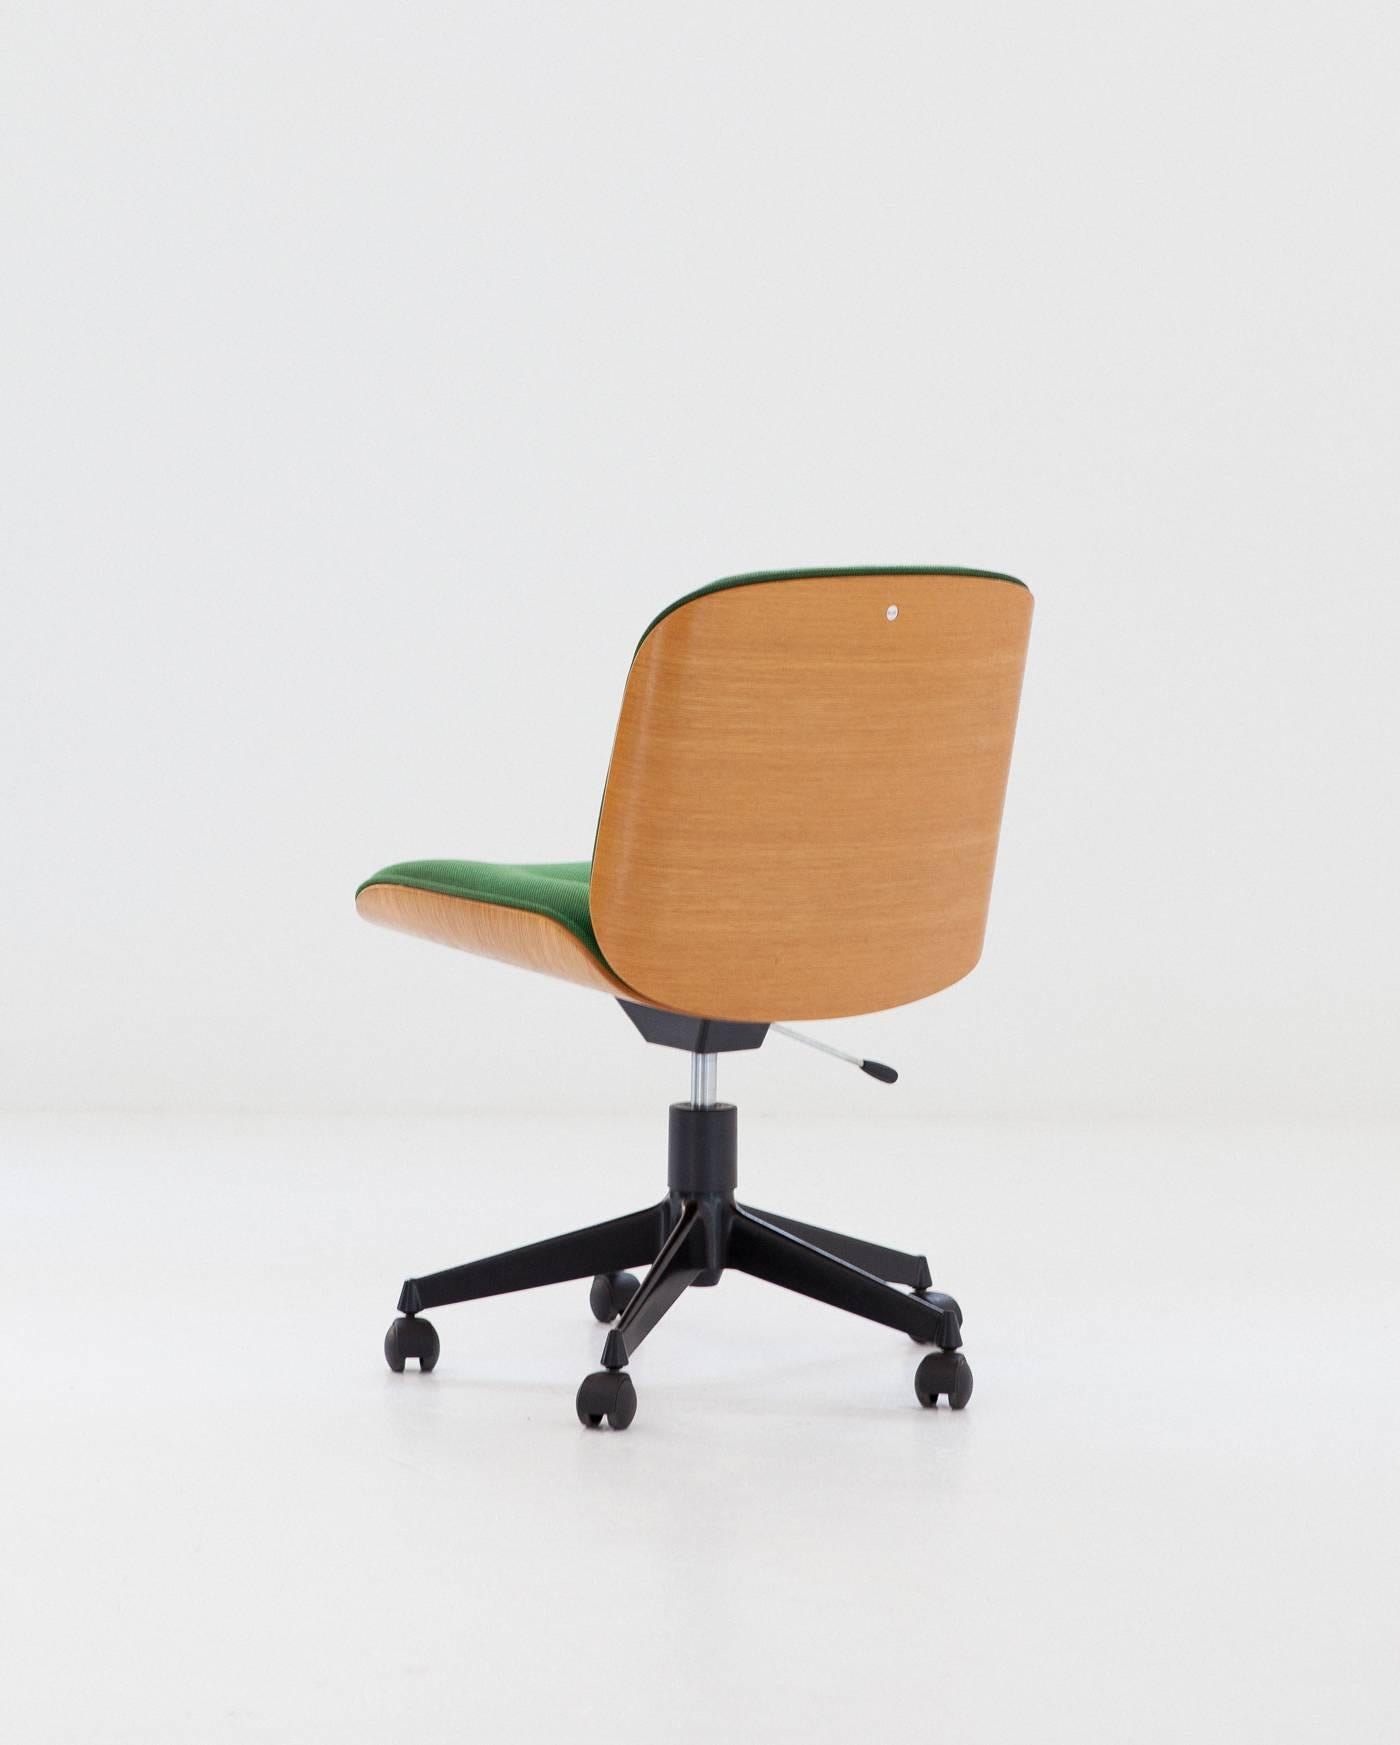 Office swivel chairs designed by Ico Parisi and produced by M.I.M. (Mobili Italiani Moderni) Roma, Italy, 1960s.
Curved wooden frame, it seems to be oak wood but we are not completely sure. Metal black lacquered legs and original green fabric.
The